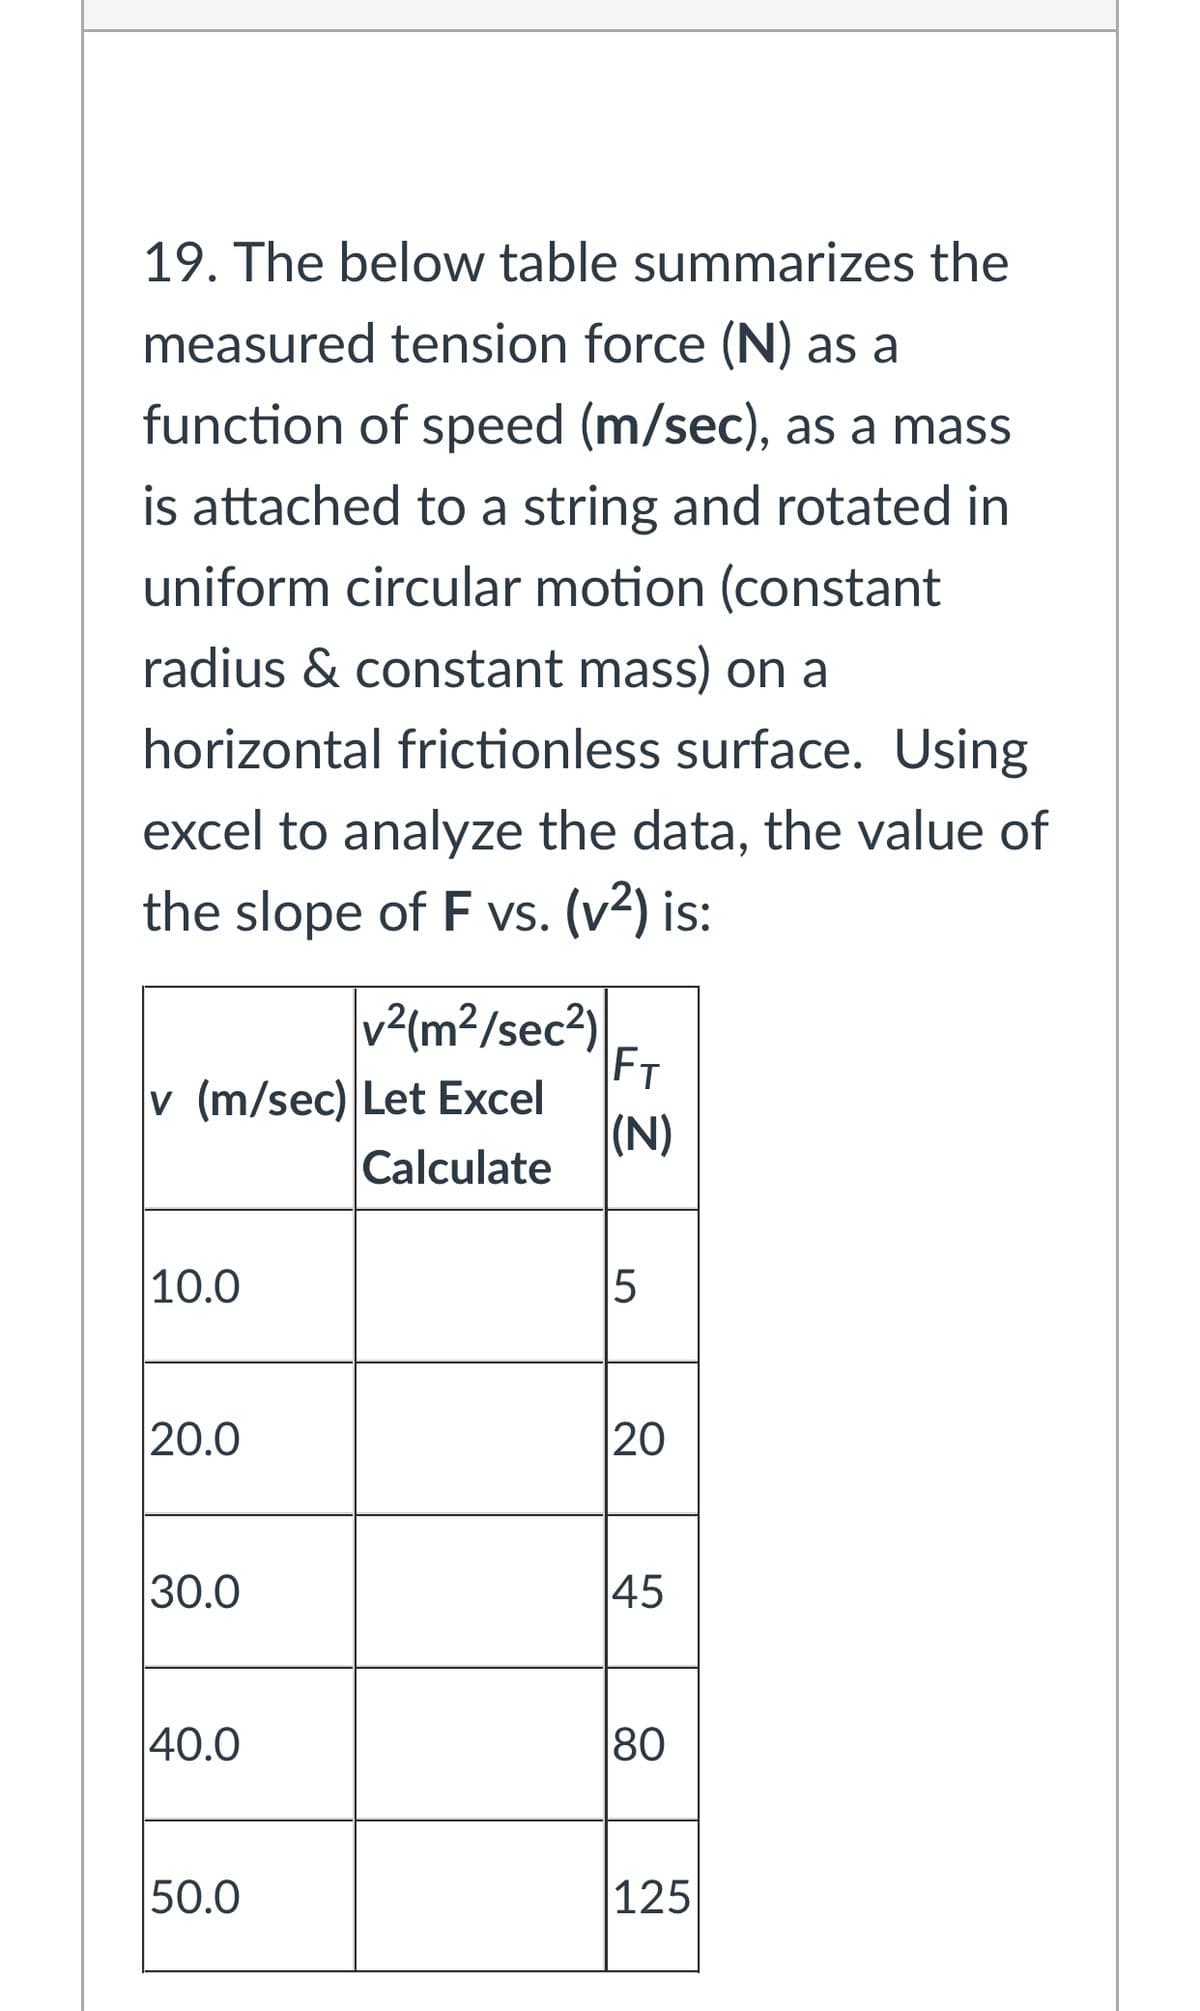 19. The below table summarizes the
measured tension force (N) as a
function of speed (m/sec), as a mass
is attached to a string and rotated in
uniform circular motion (constant
radius & constant mass) on a
horizontal frictionless surface. Using
excel to analyze the data, the value of
the slope of F vs. (v2) is:
v2(m²/sec²)
FT
v (m/sec) Let Excel
(N)
Calculate
10.0
15
20.0
30.0
45
|40.0
80
50.0
125
20
